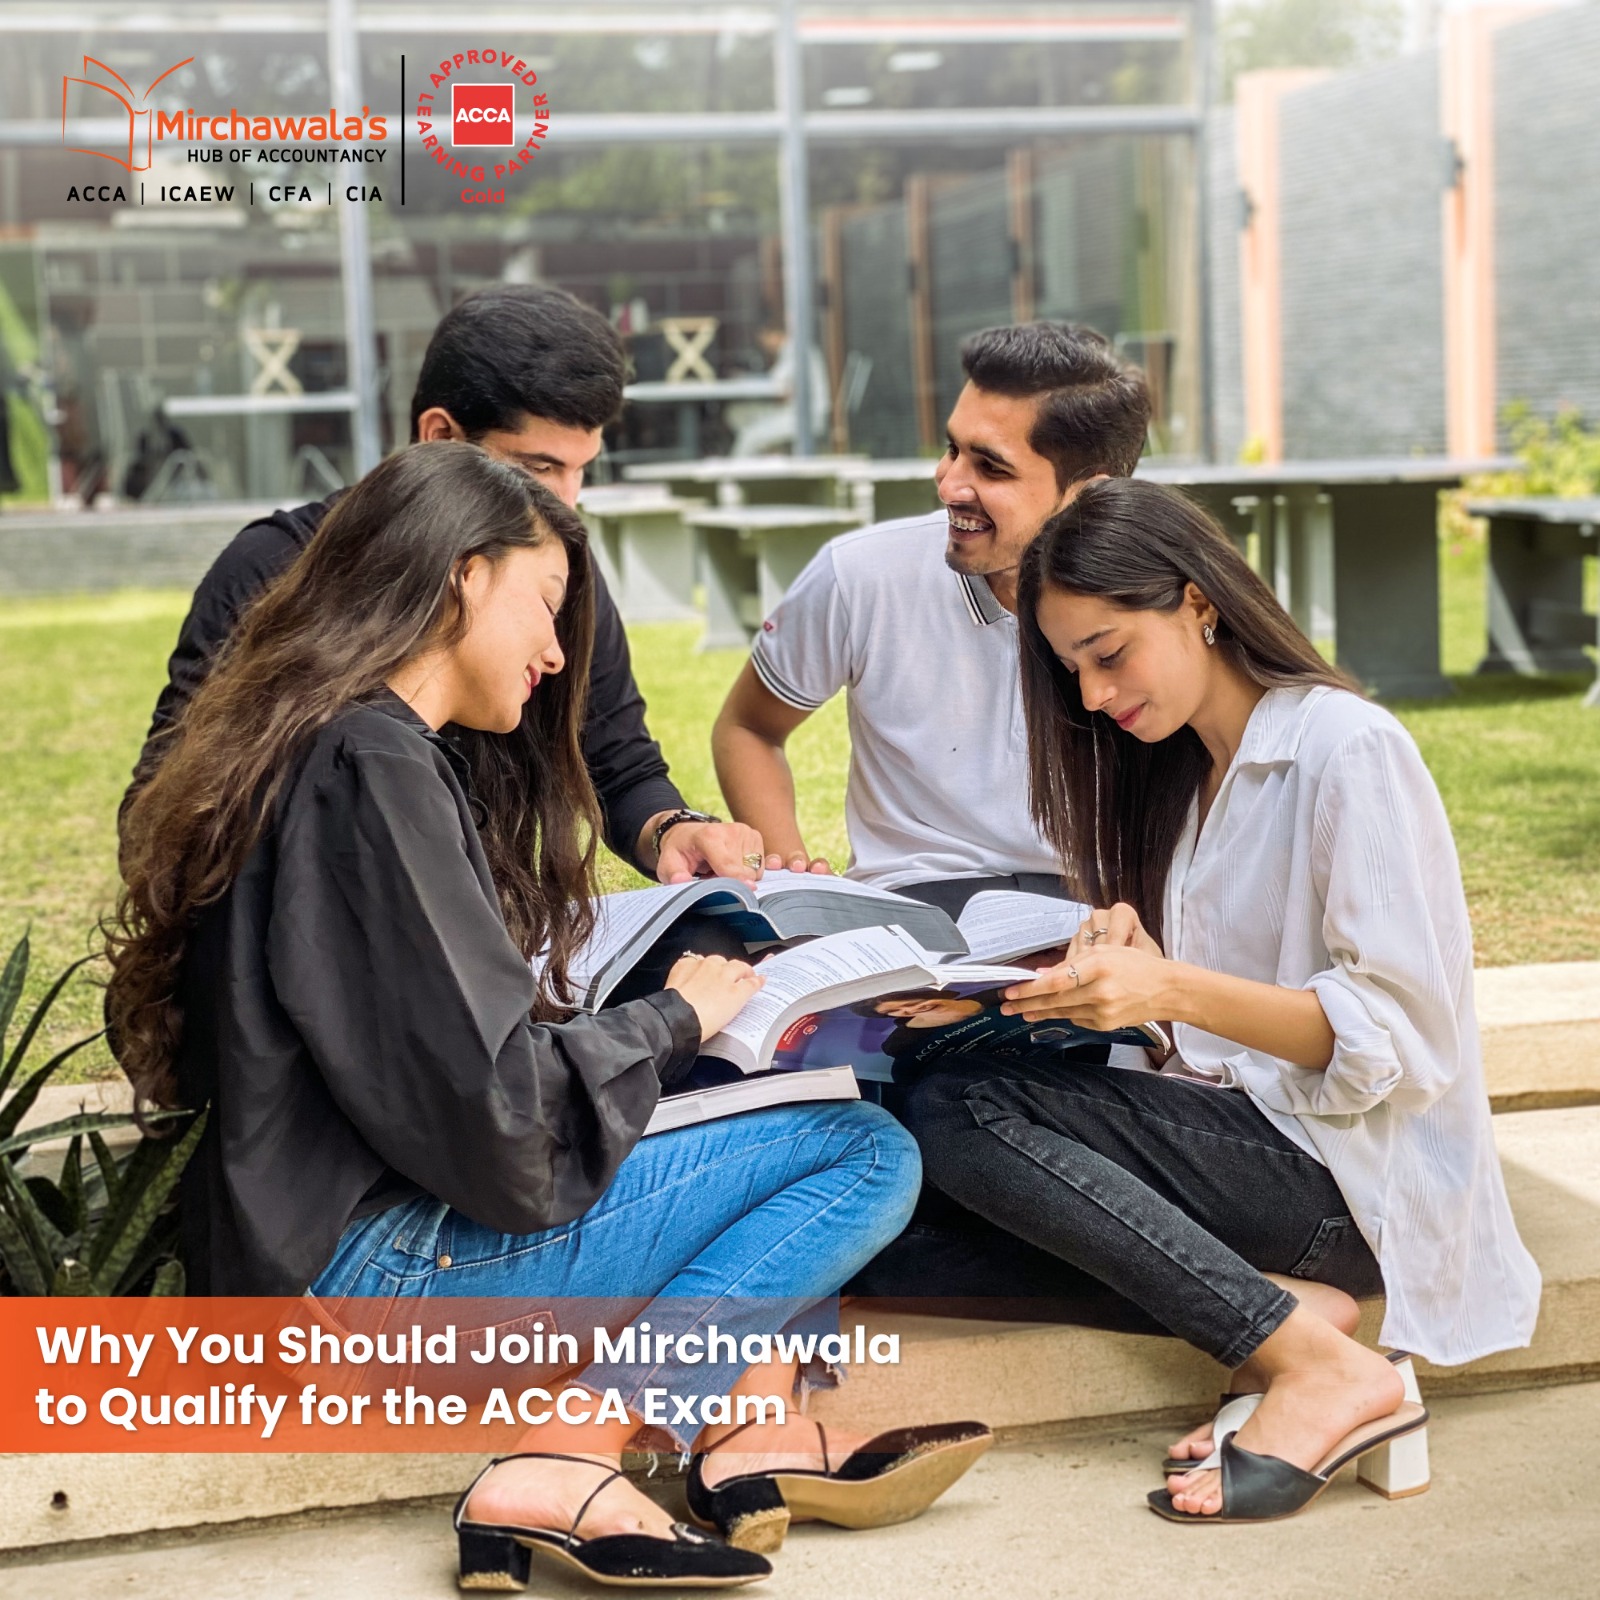 Why You Should Join Mirchawala to Qualify for the ACCA Exam